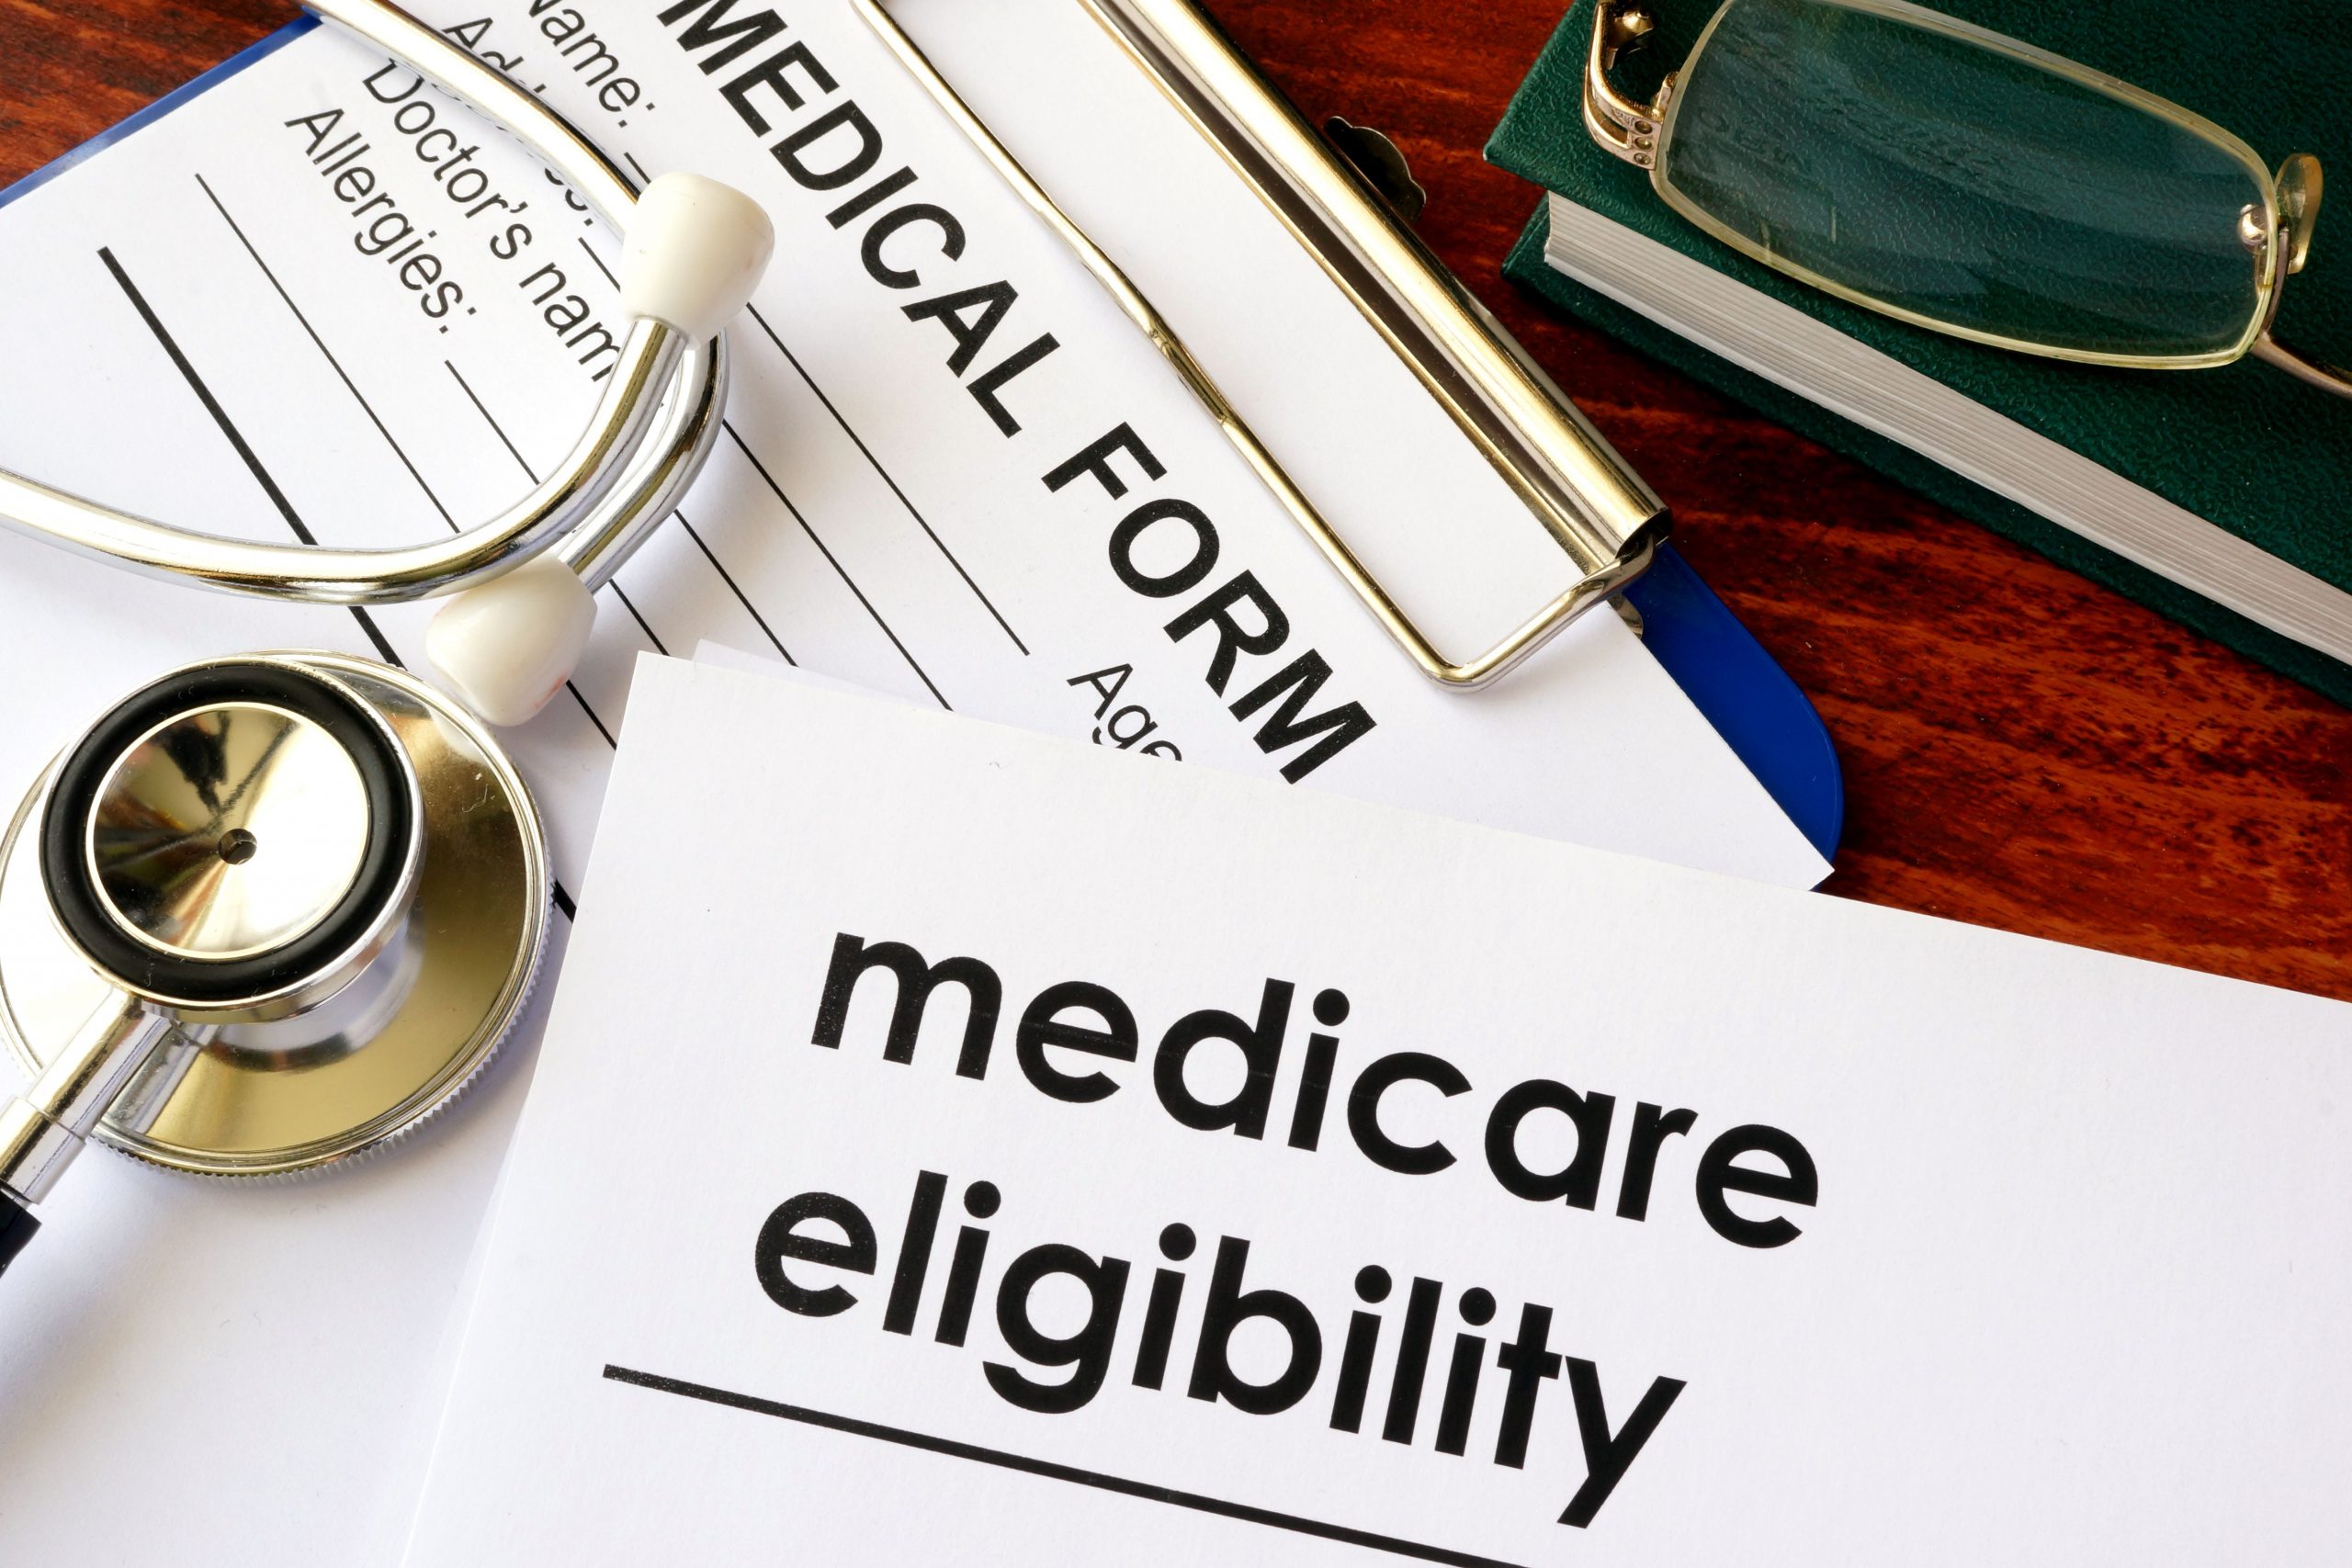 What Is the Age for Medicare Eligibility?